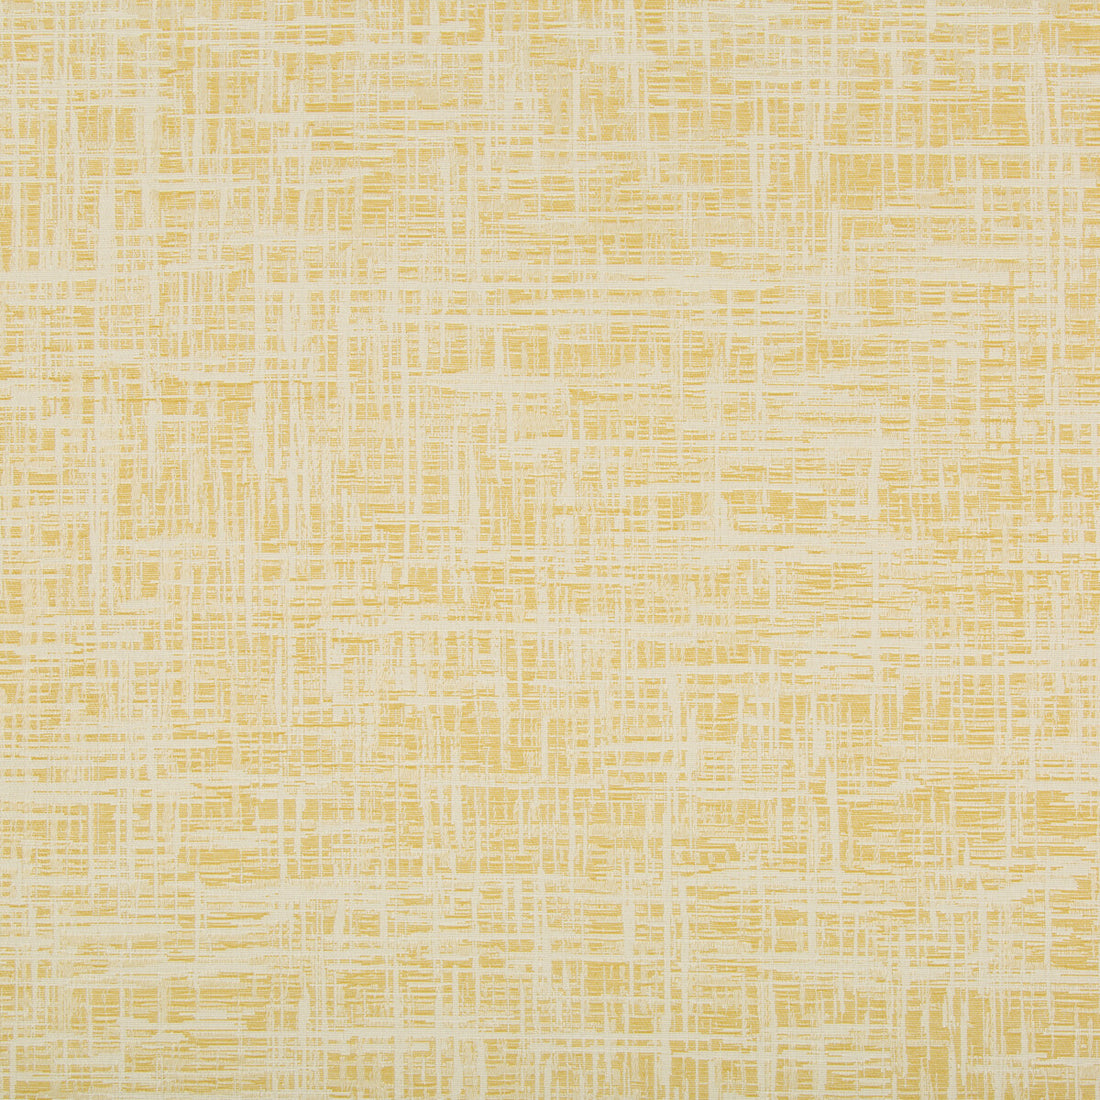 Dejo fabric in limonata color - pattern 35045.4.0 - by Kravet Contract in the Gis Crypton collection